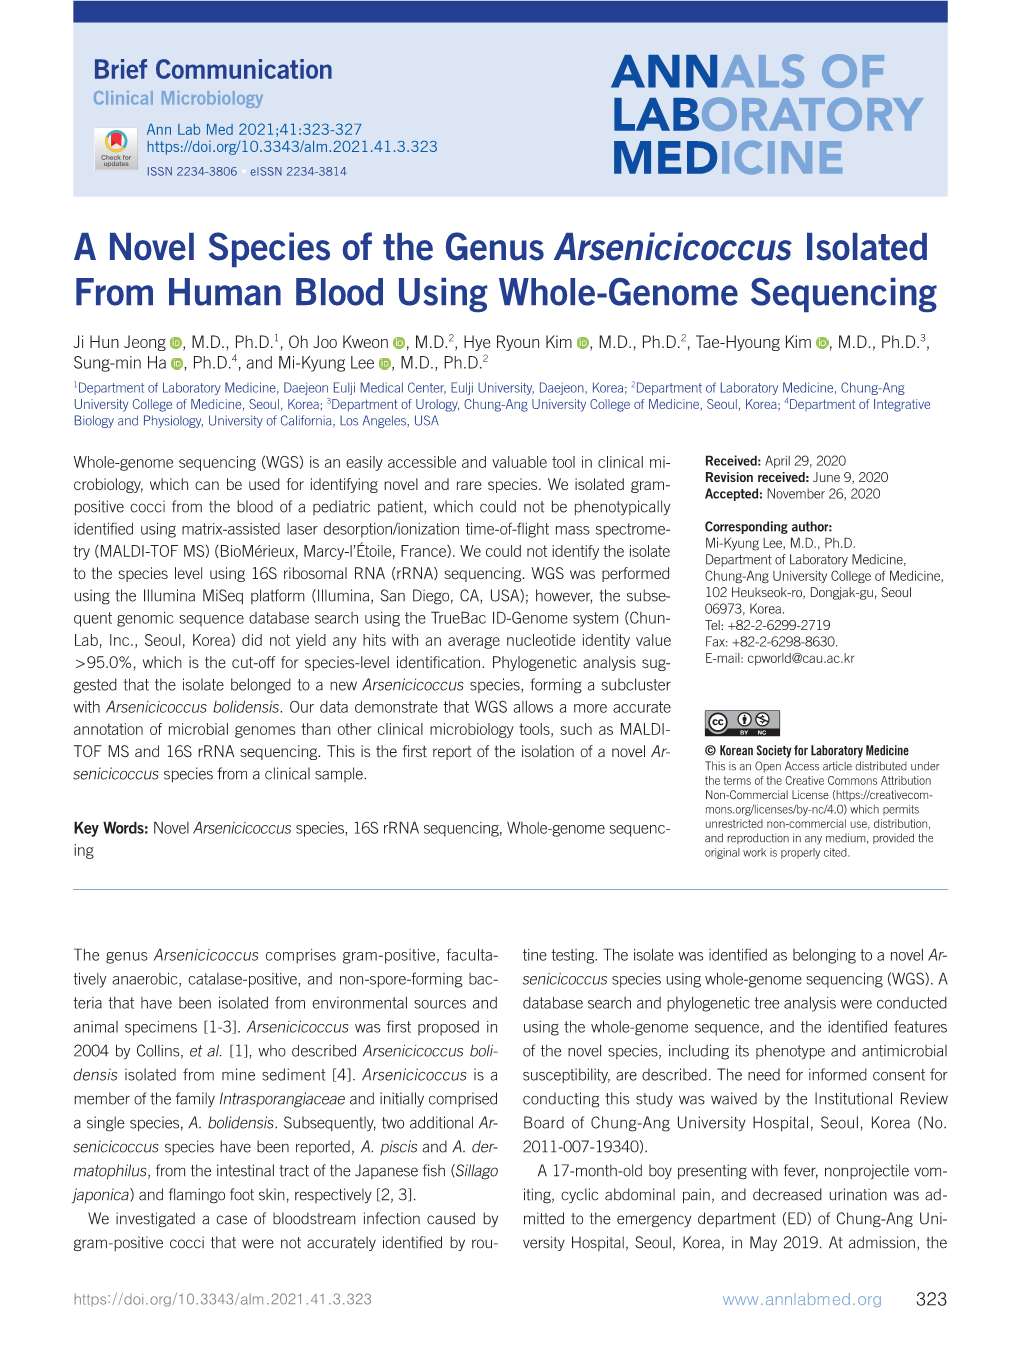 A Novel Species of the Genus Arsenicicoccus Isolated from Human Blood Using Whole-Genome Sequencing